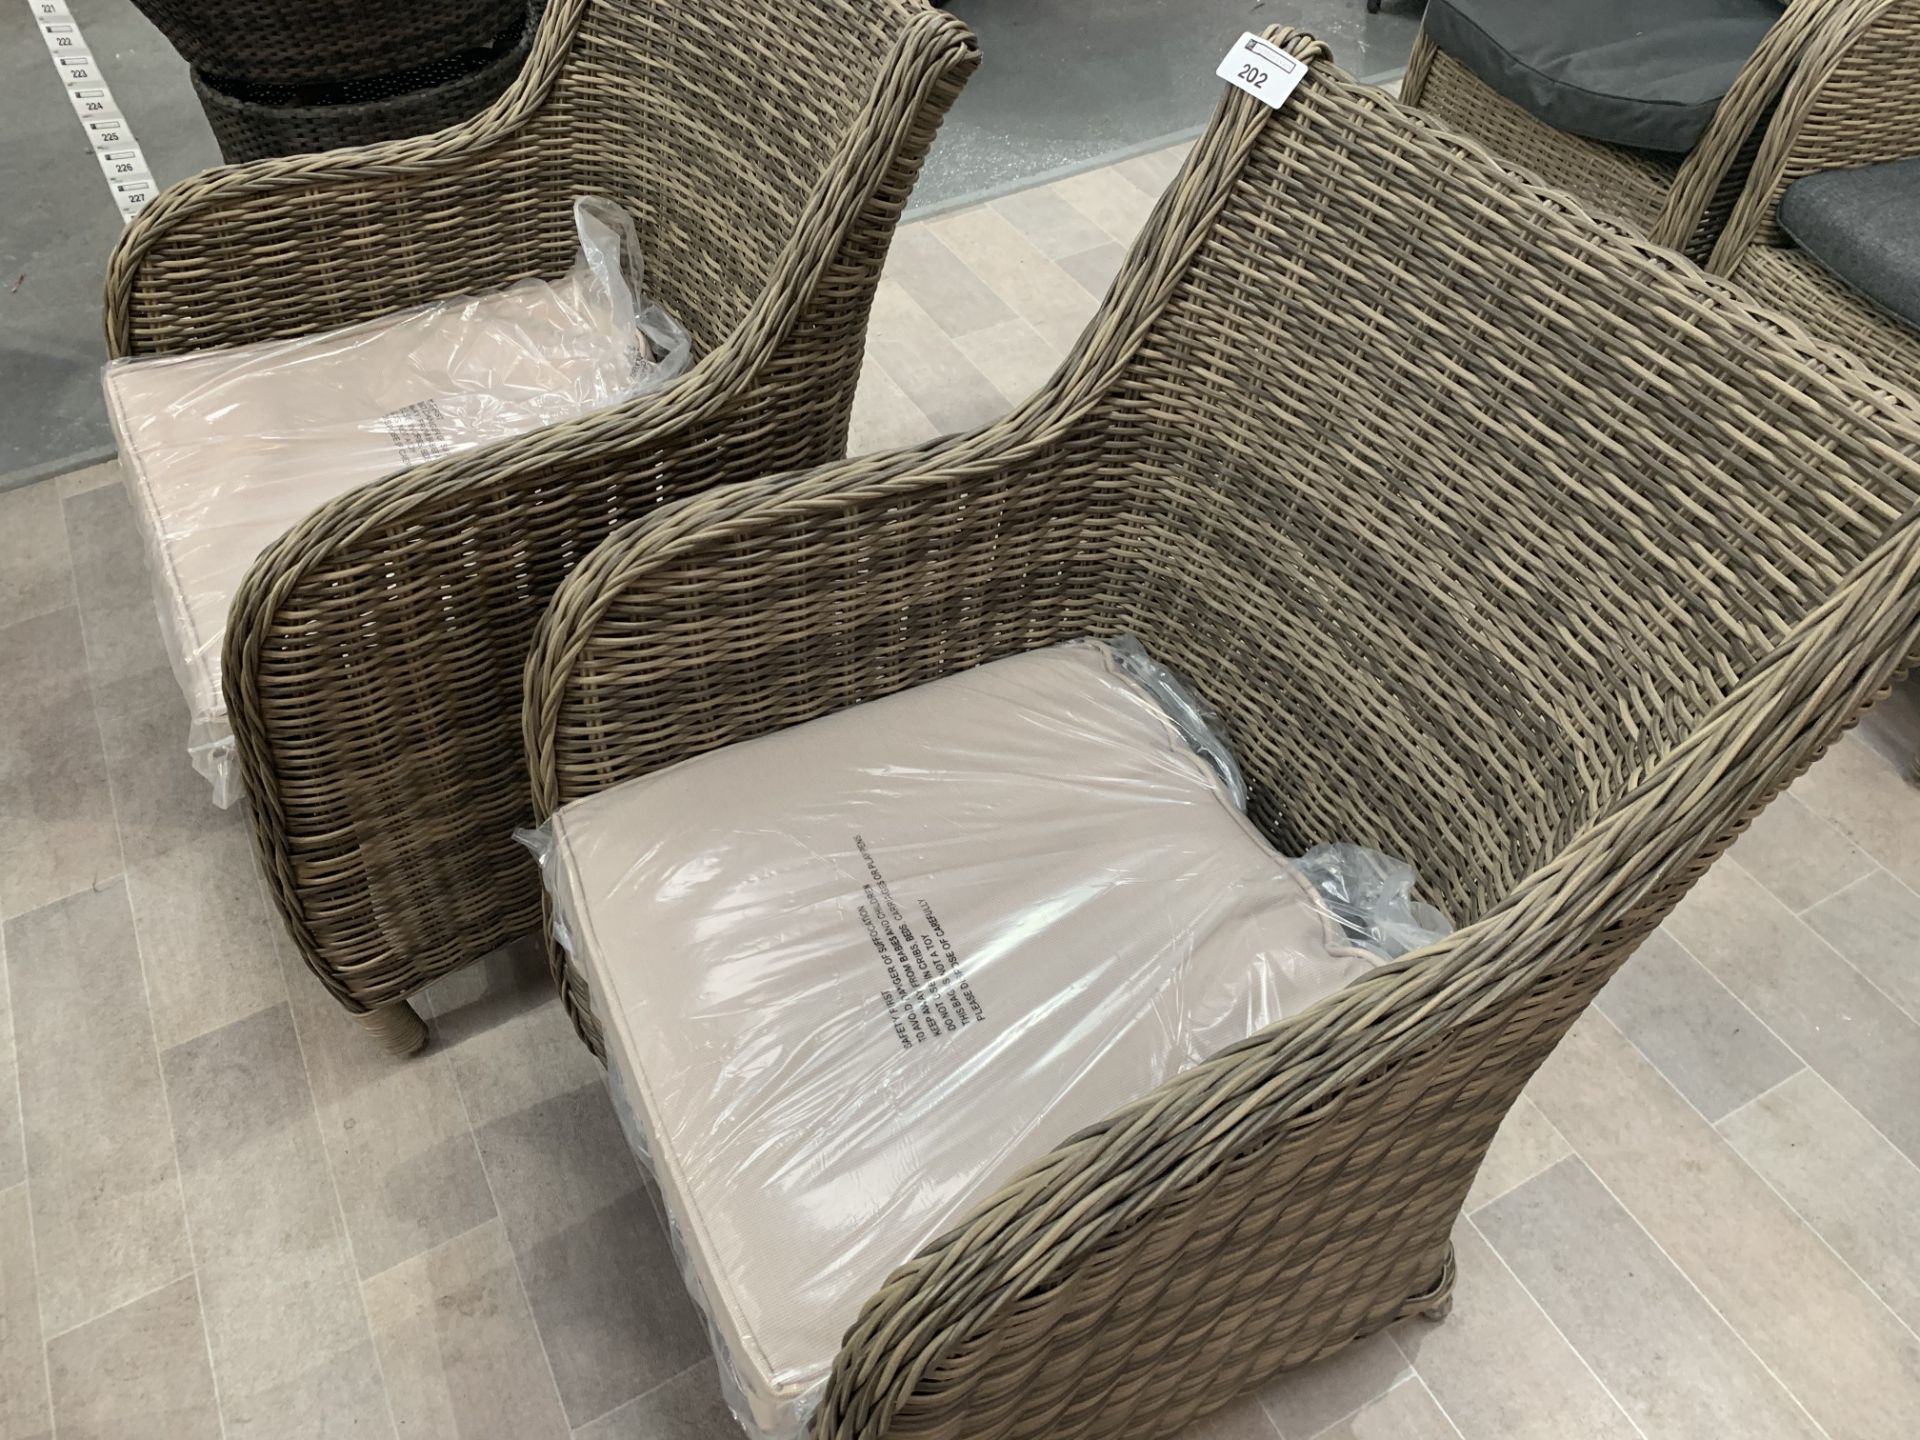 A Pair of woven Maze Rattan arm chairs with cushion seats - Image 3 of 3